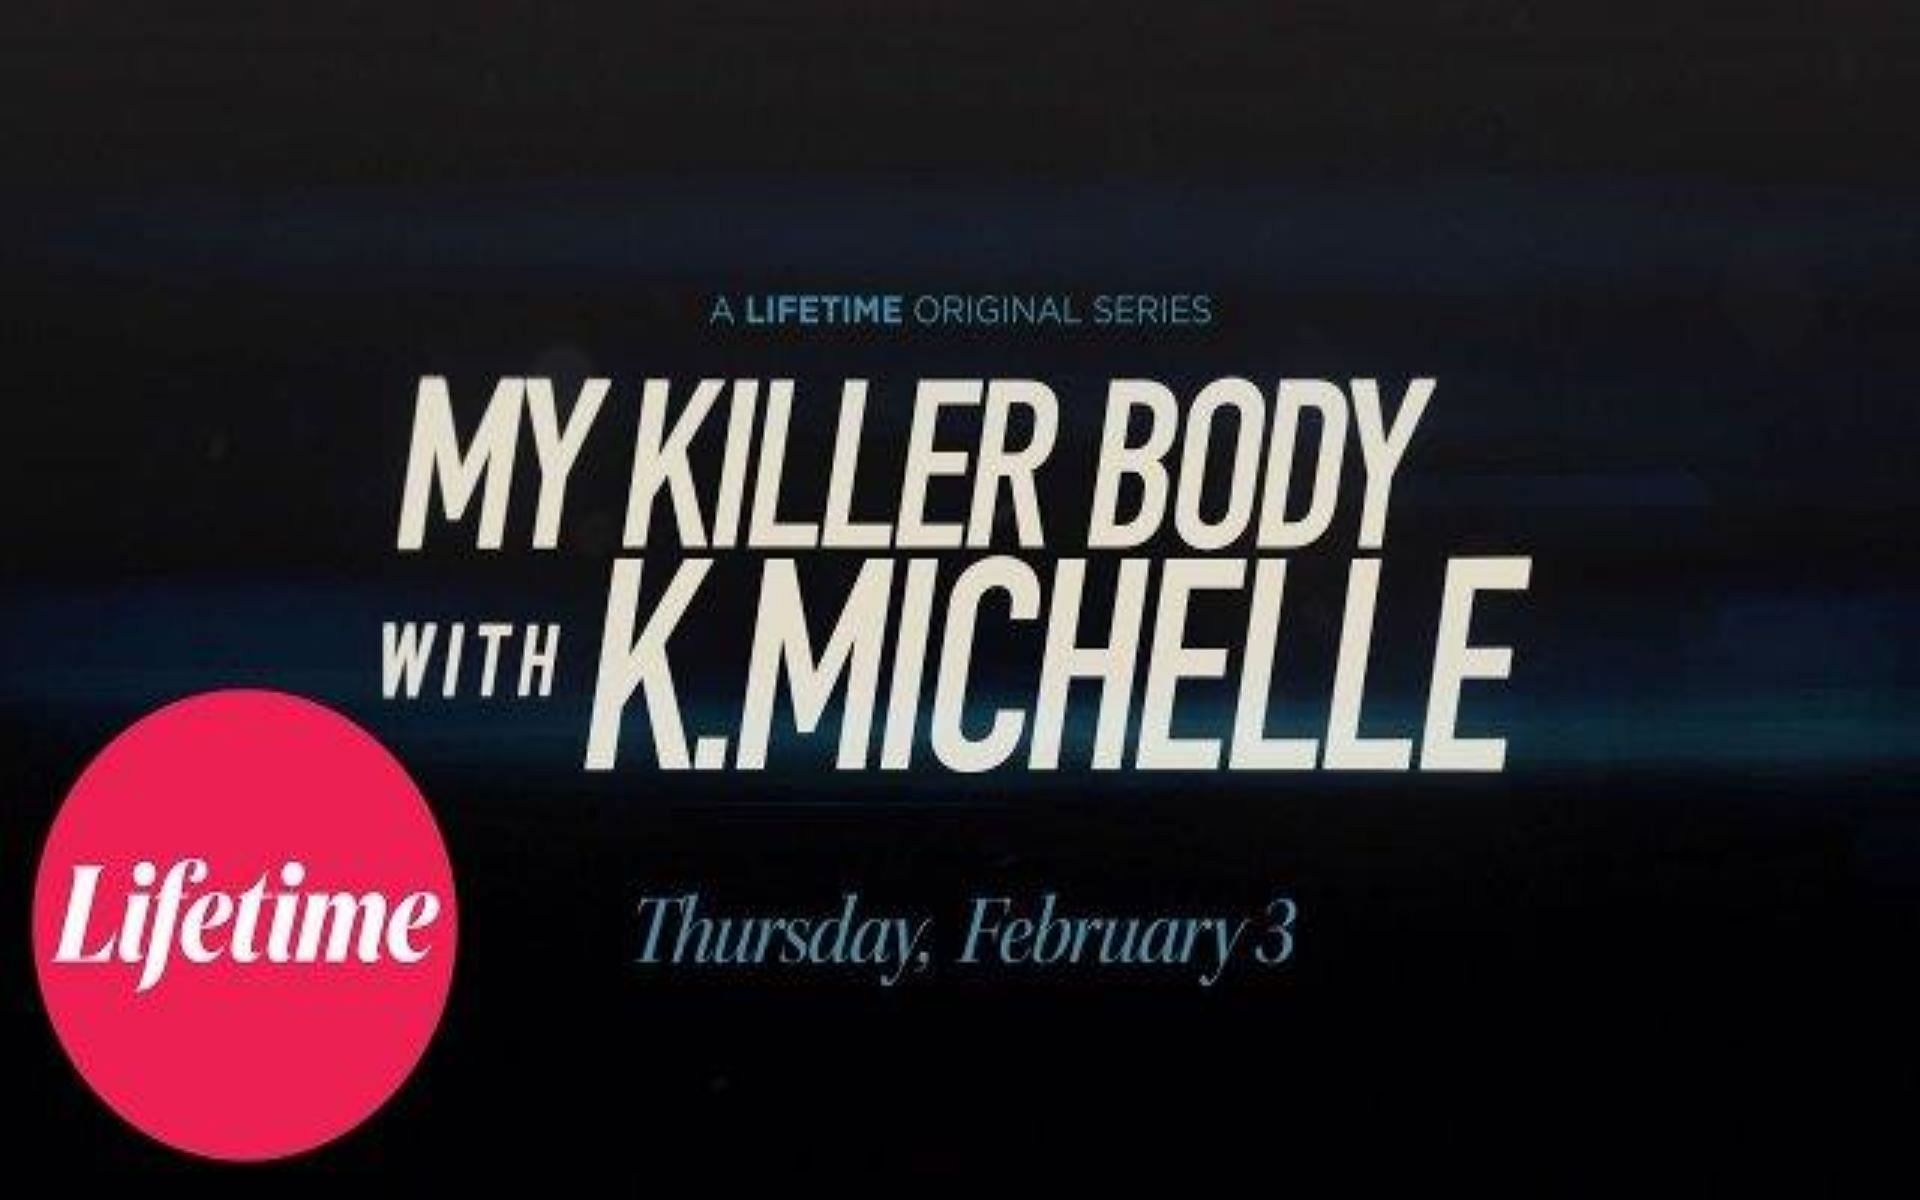 A poster of My Killer Body with Kimberly Michelle (Image Via YouTube)